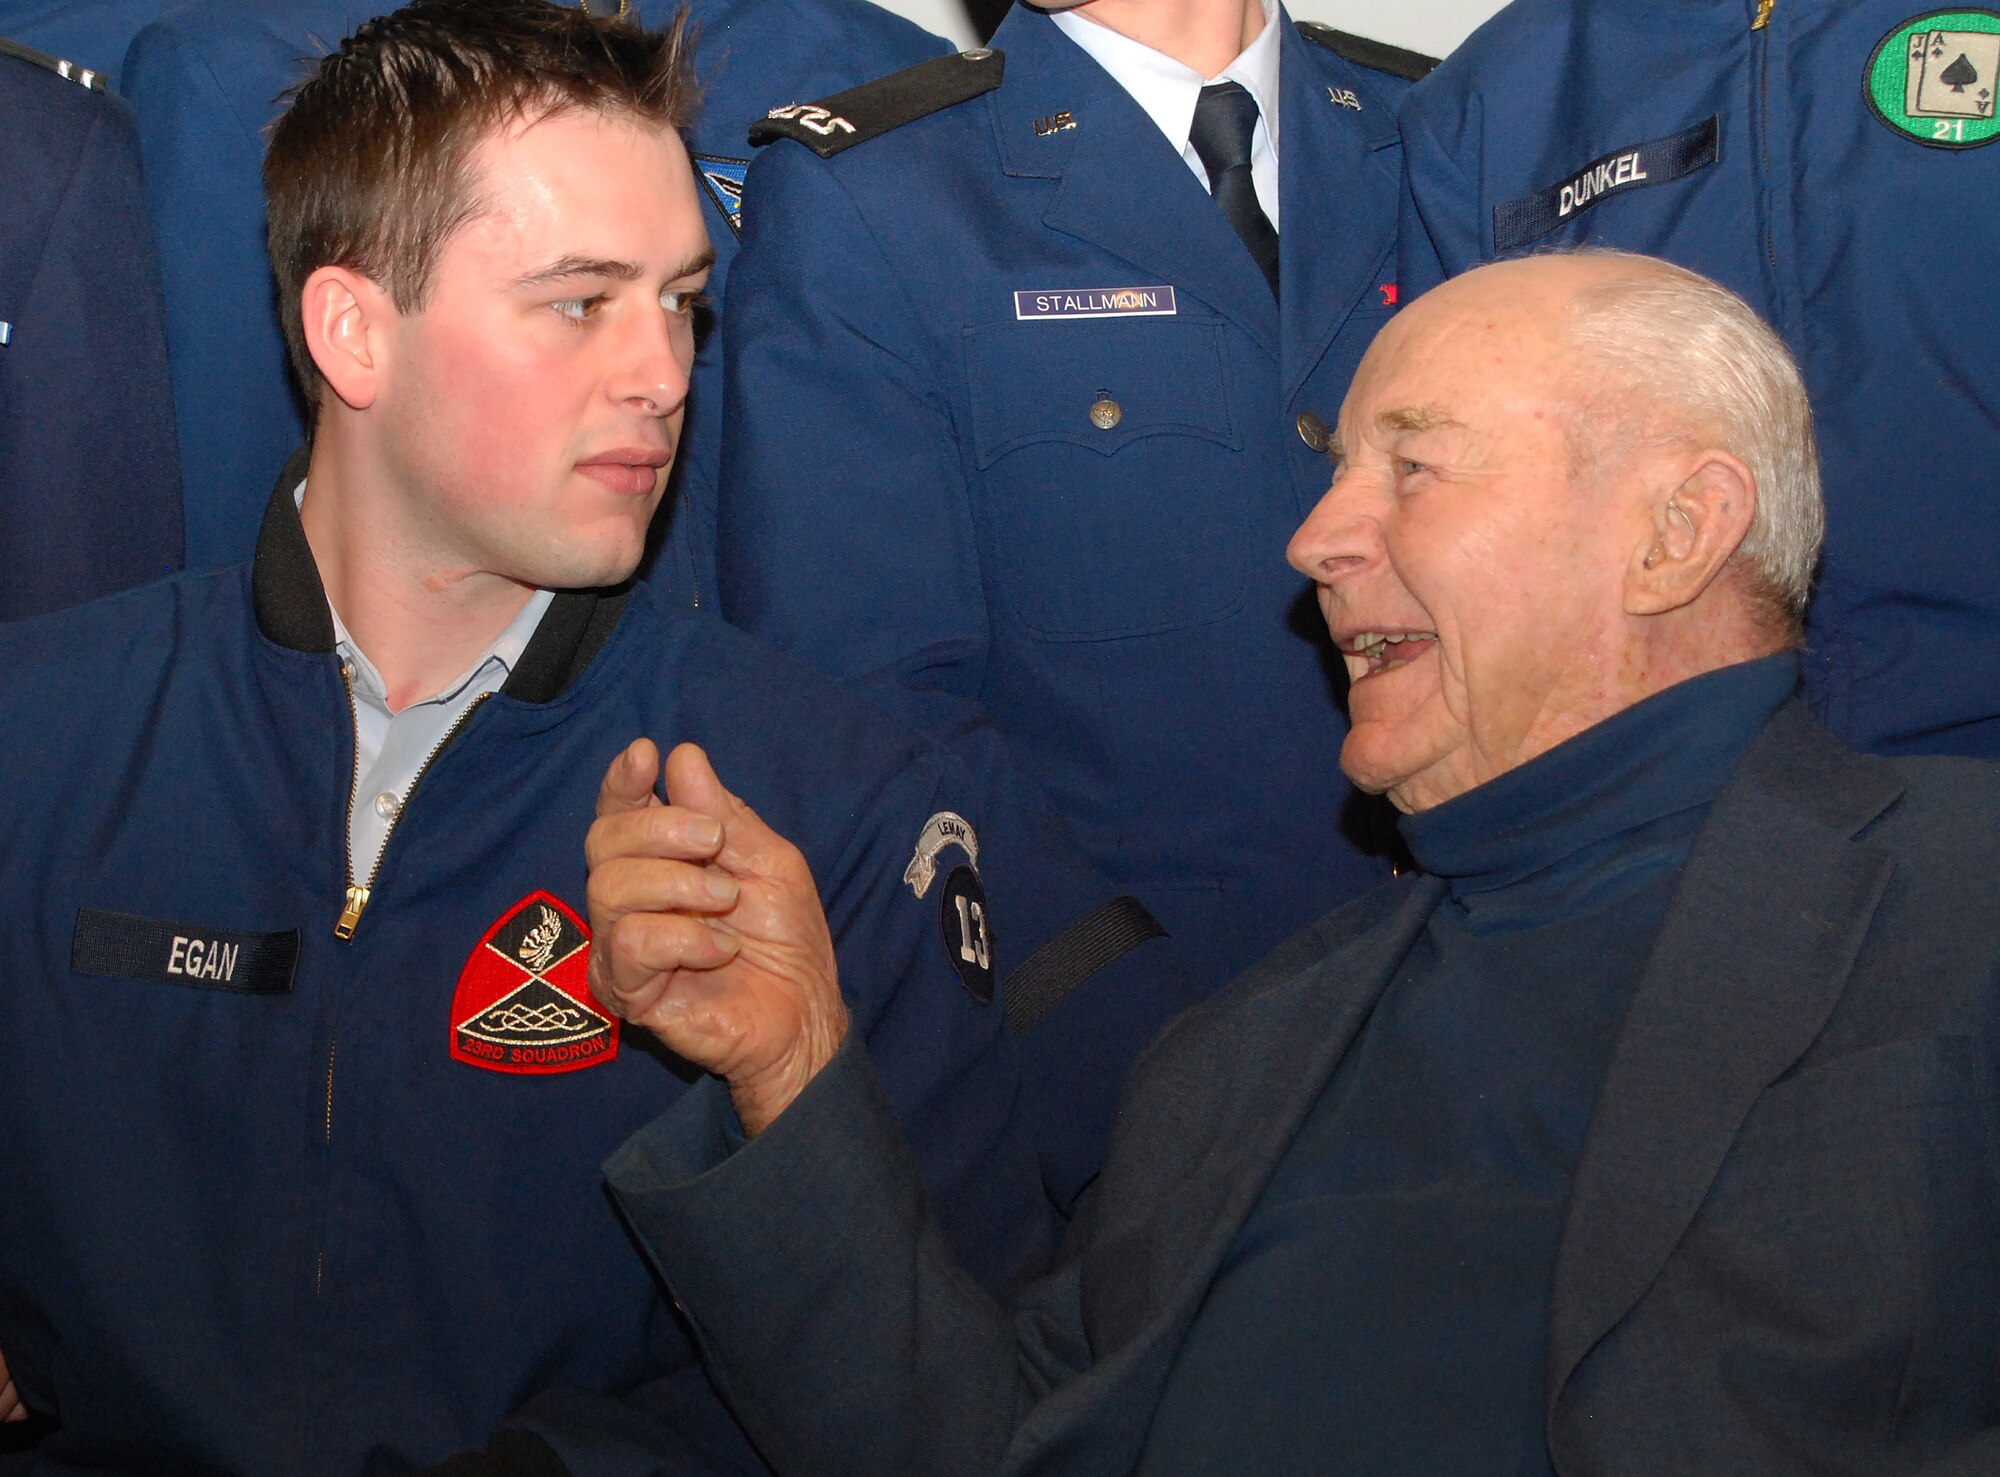 Retired Brig. Gen. Chuck Yeager, right, talks to Cadet 1st Class Henry Egan after a National Character and Leadership Symposium presentation at the Air Force Academy Feb. 22, 2013. Yeager was the first person to fly faster than the speed of sound, having made the historic flight Oct. 14, 1947. Egan is assigned to Cadet Squadron 23. (U.S. Air Force photo/Don Branum)